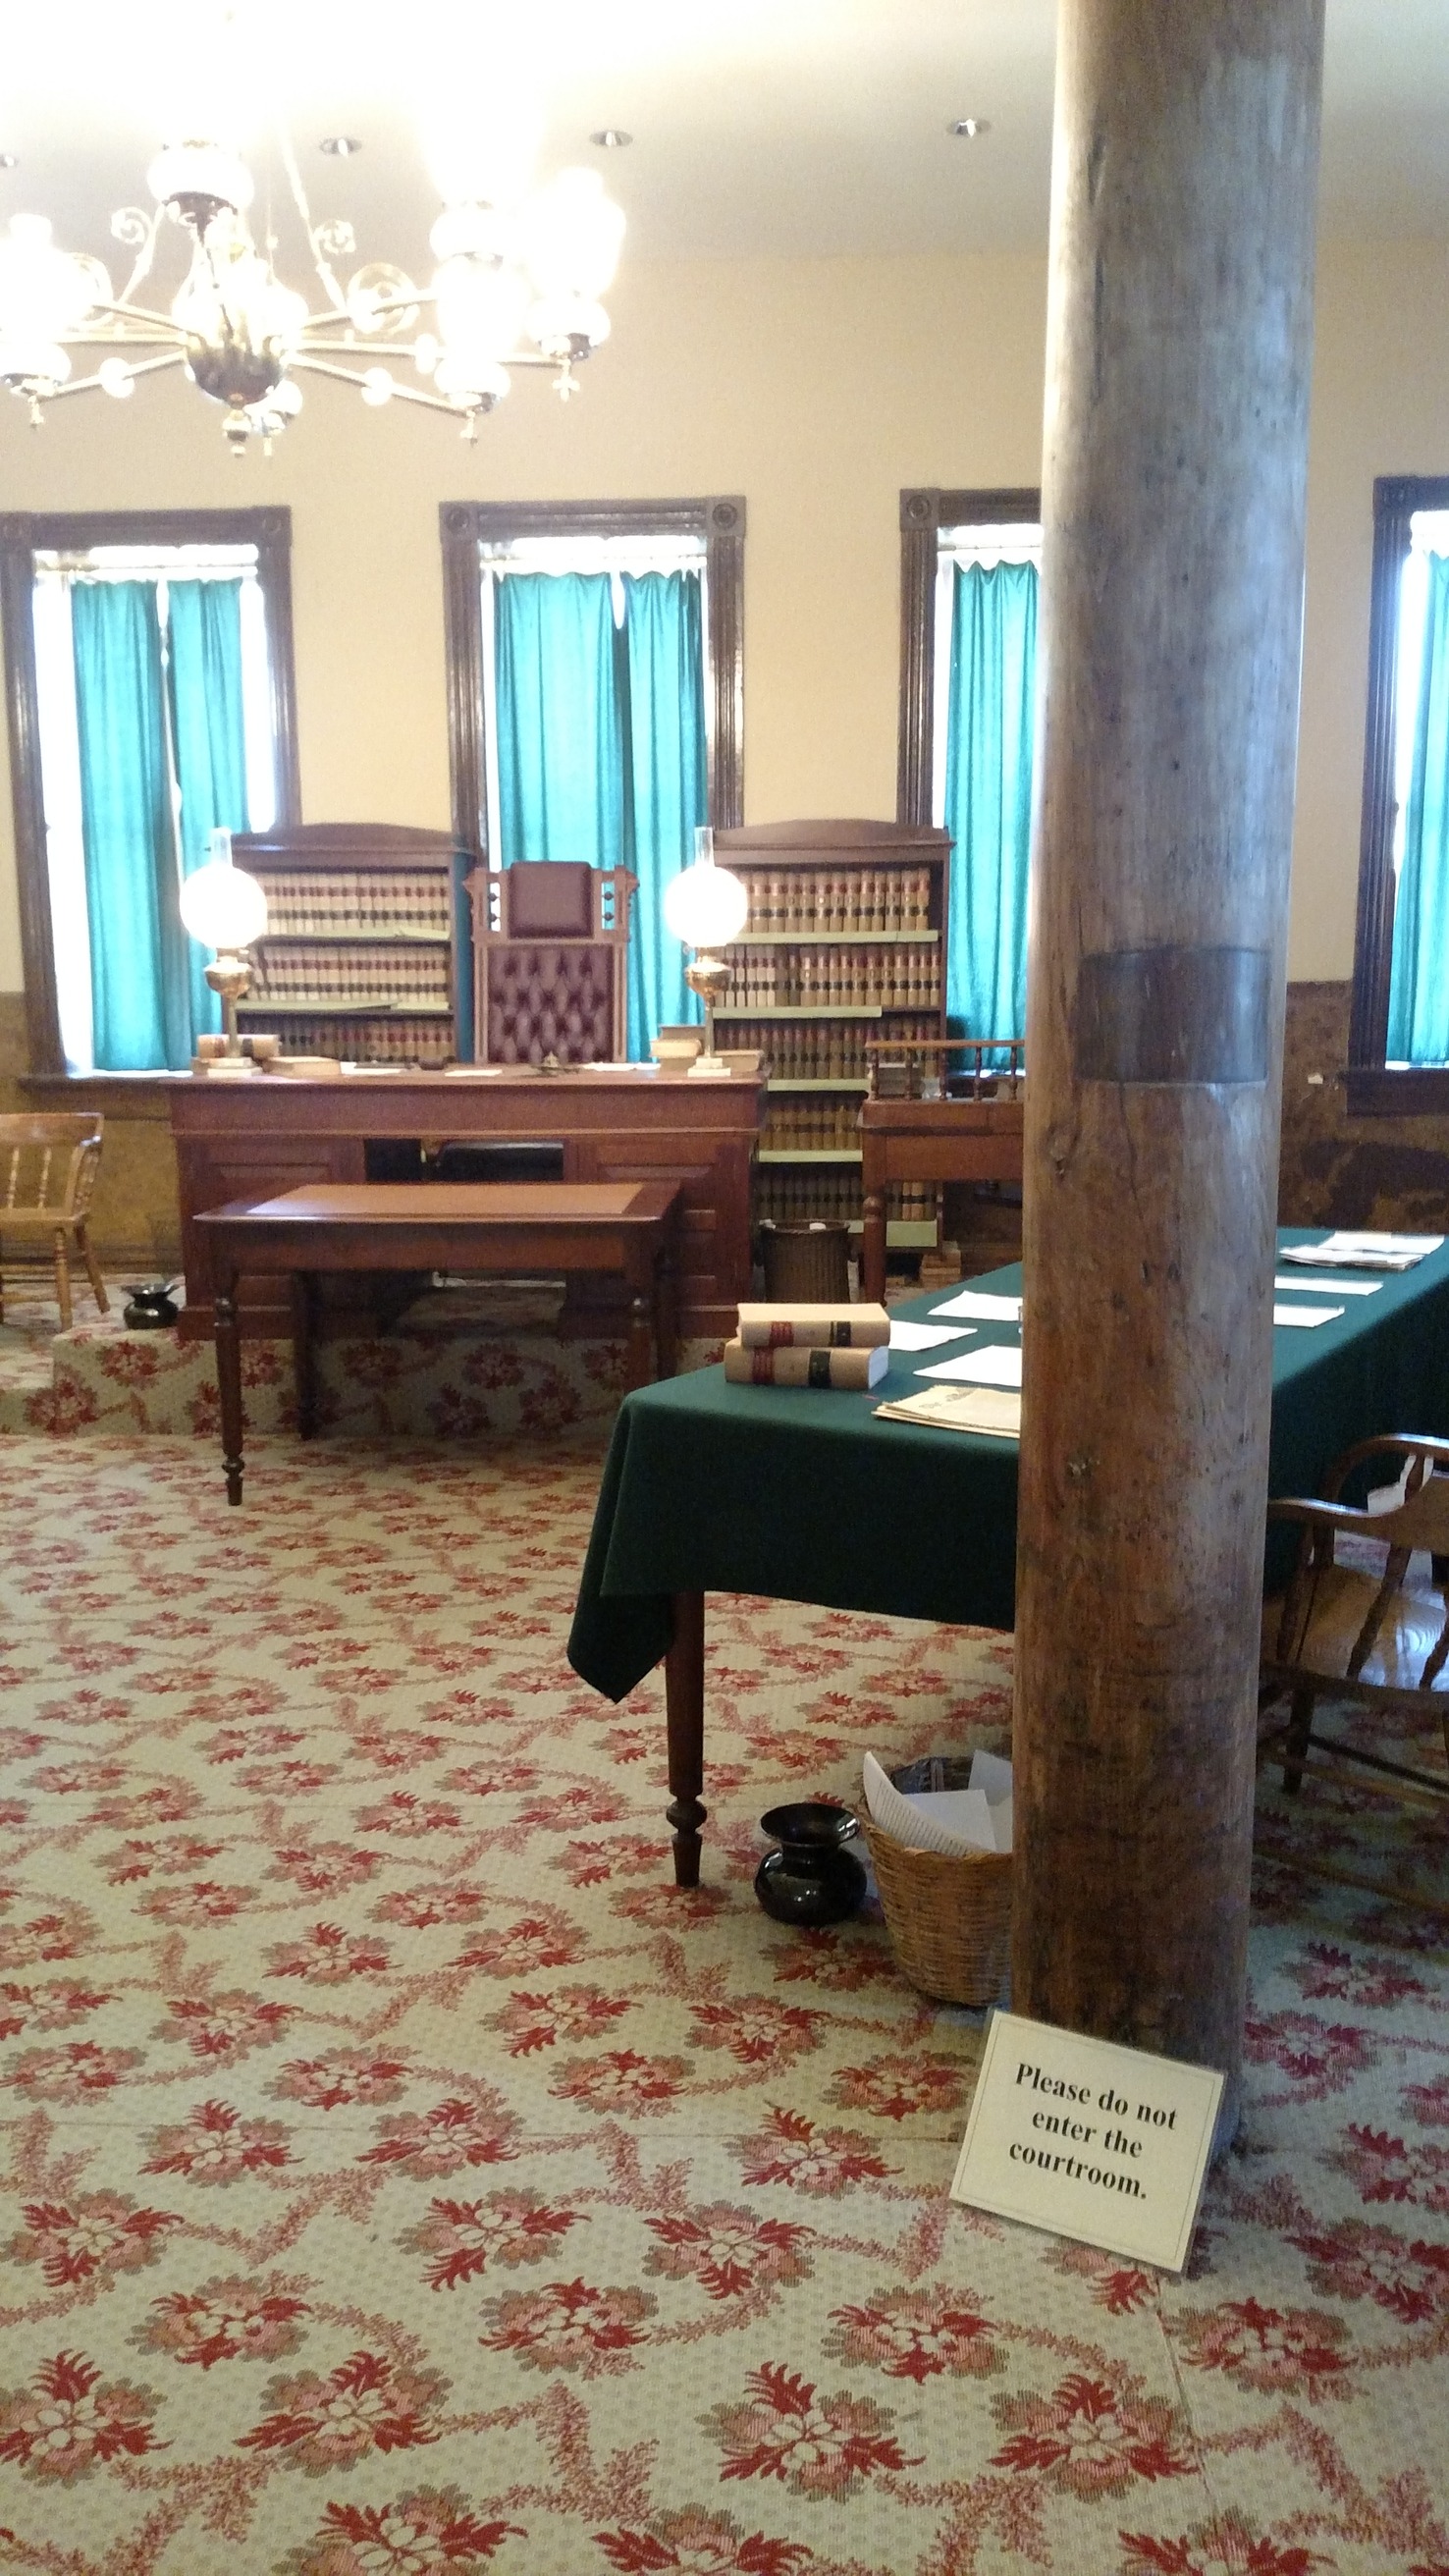 A courtroom exhibit at the Fort Smith National Historic Site Visitor Center Museum in Fort Smith, Arkansas